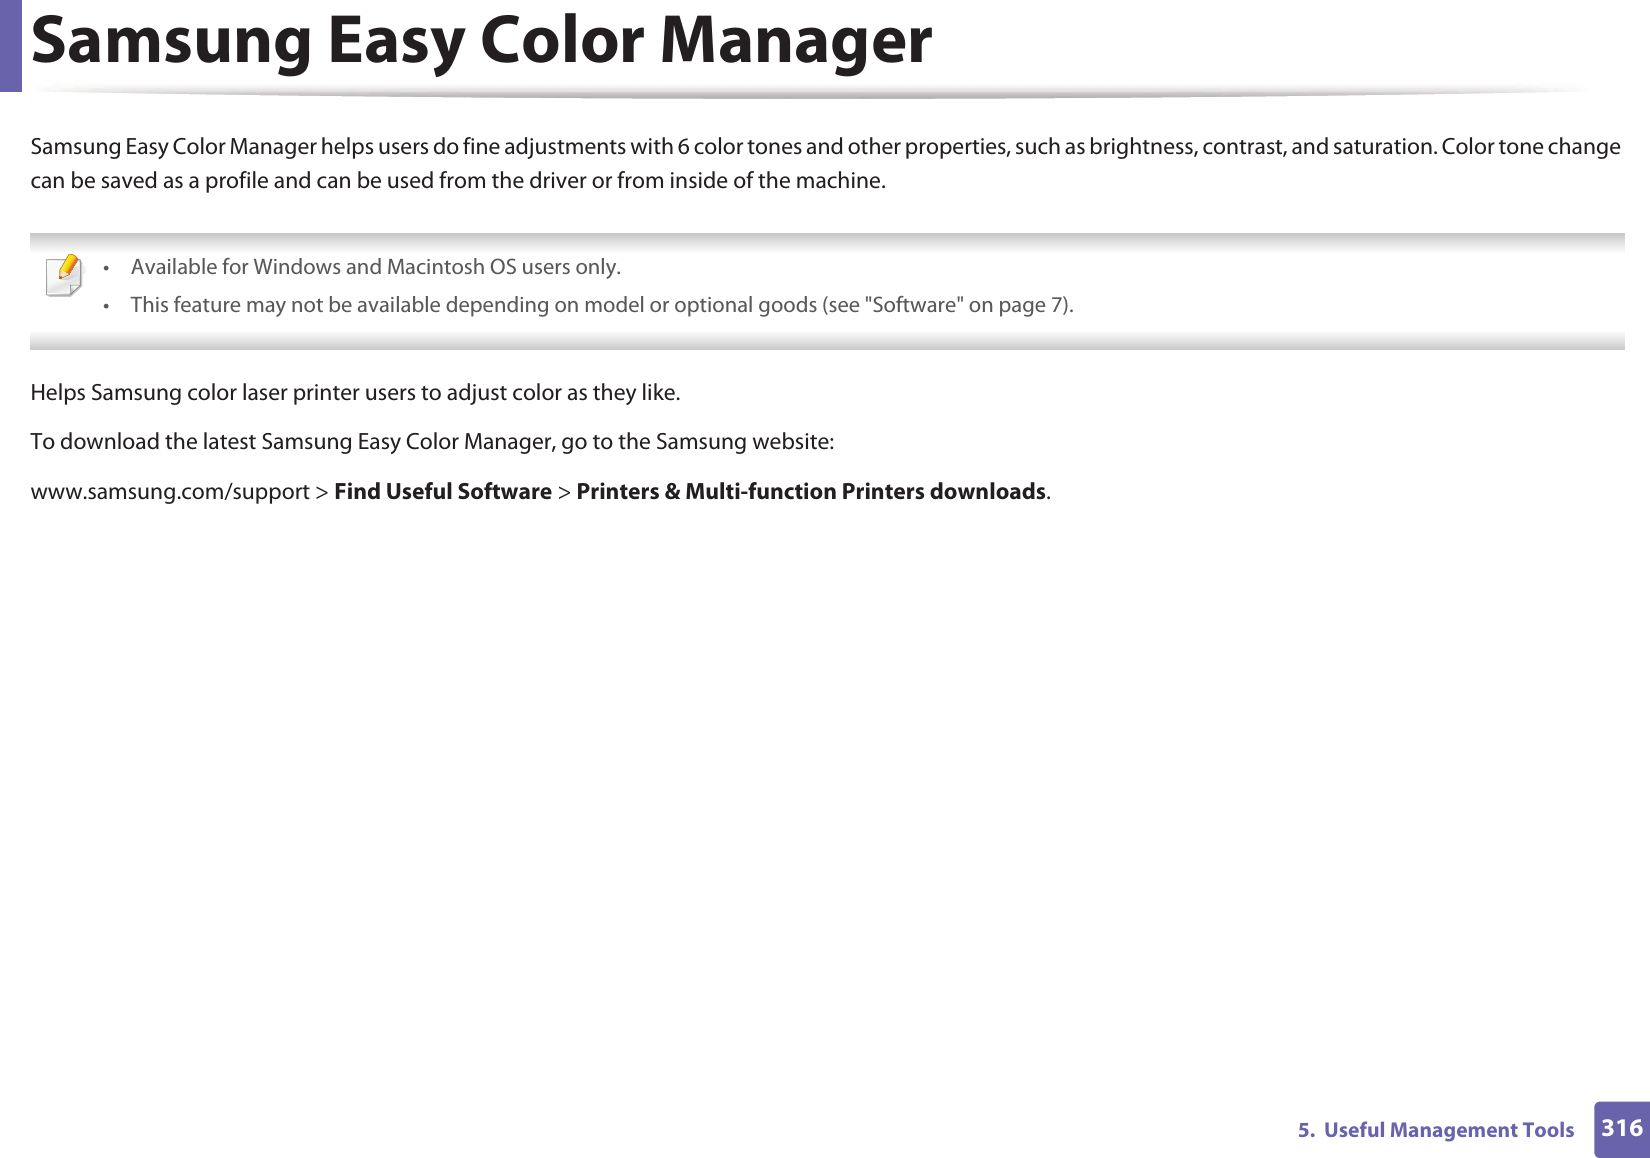 3165.  Useful Management ToolsSamsung Easy Color ManagerSamsung Easy Color Manager helps users do fine adjustments with 6 color tones and other properties, such as brightness, contrast, and saturation. Color tone change can be saved as a profile and can be used from the driver or from inside of the machine. • Available for Windows and Macintosh OS users only.• This feature may not be available depending on model or optional goods (see &quot;Software&quot; on page 7). Helps Samsung color laser printer users to adjust color as they like.To download the latest Samsung Easy Color Manager, go to the Samsung website:www.samsung.com/support &gt; Find Useful Software &gt; Printers &amp; Multi-function Printers downloads.